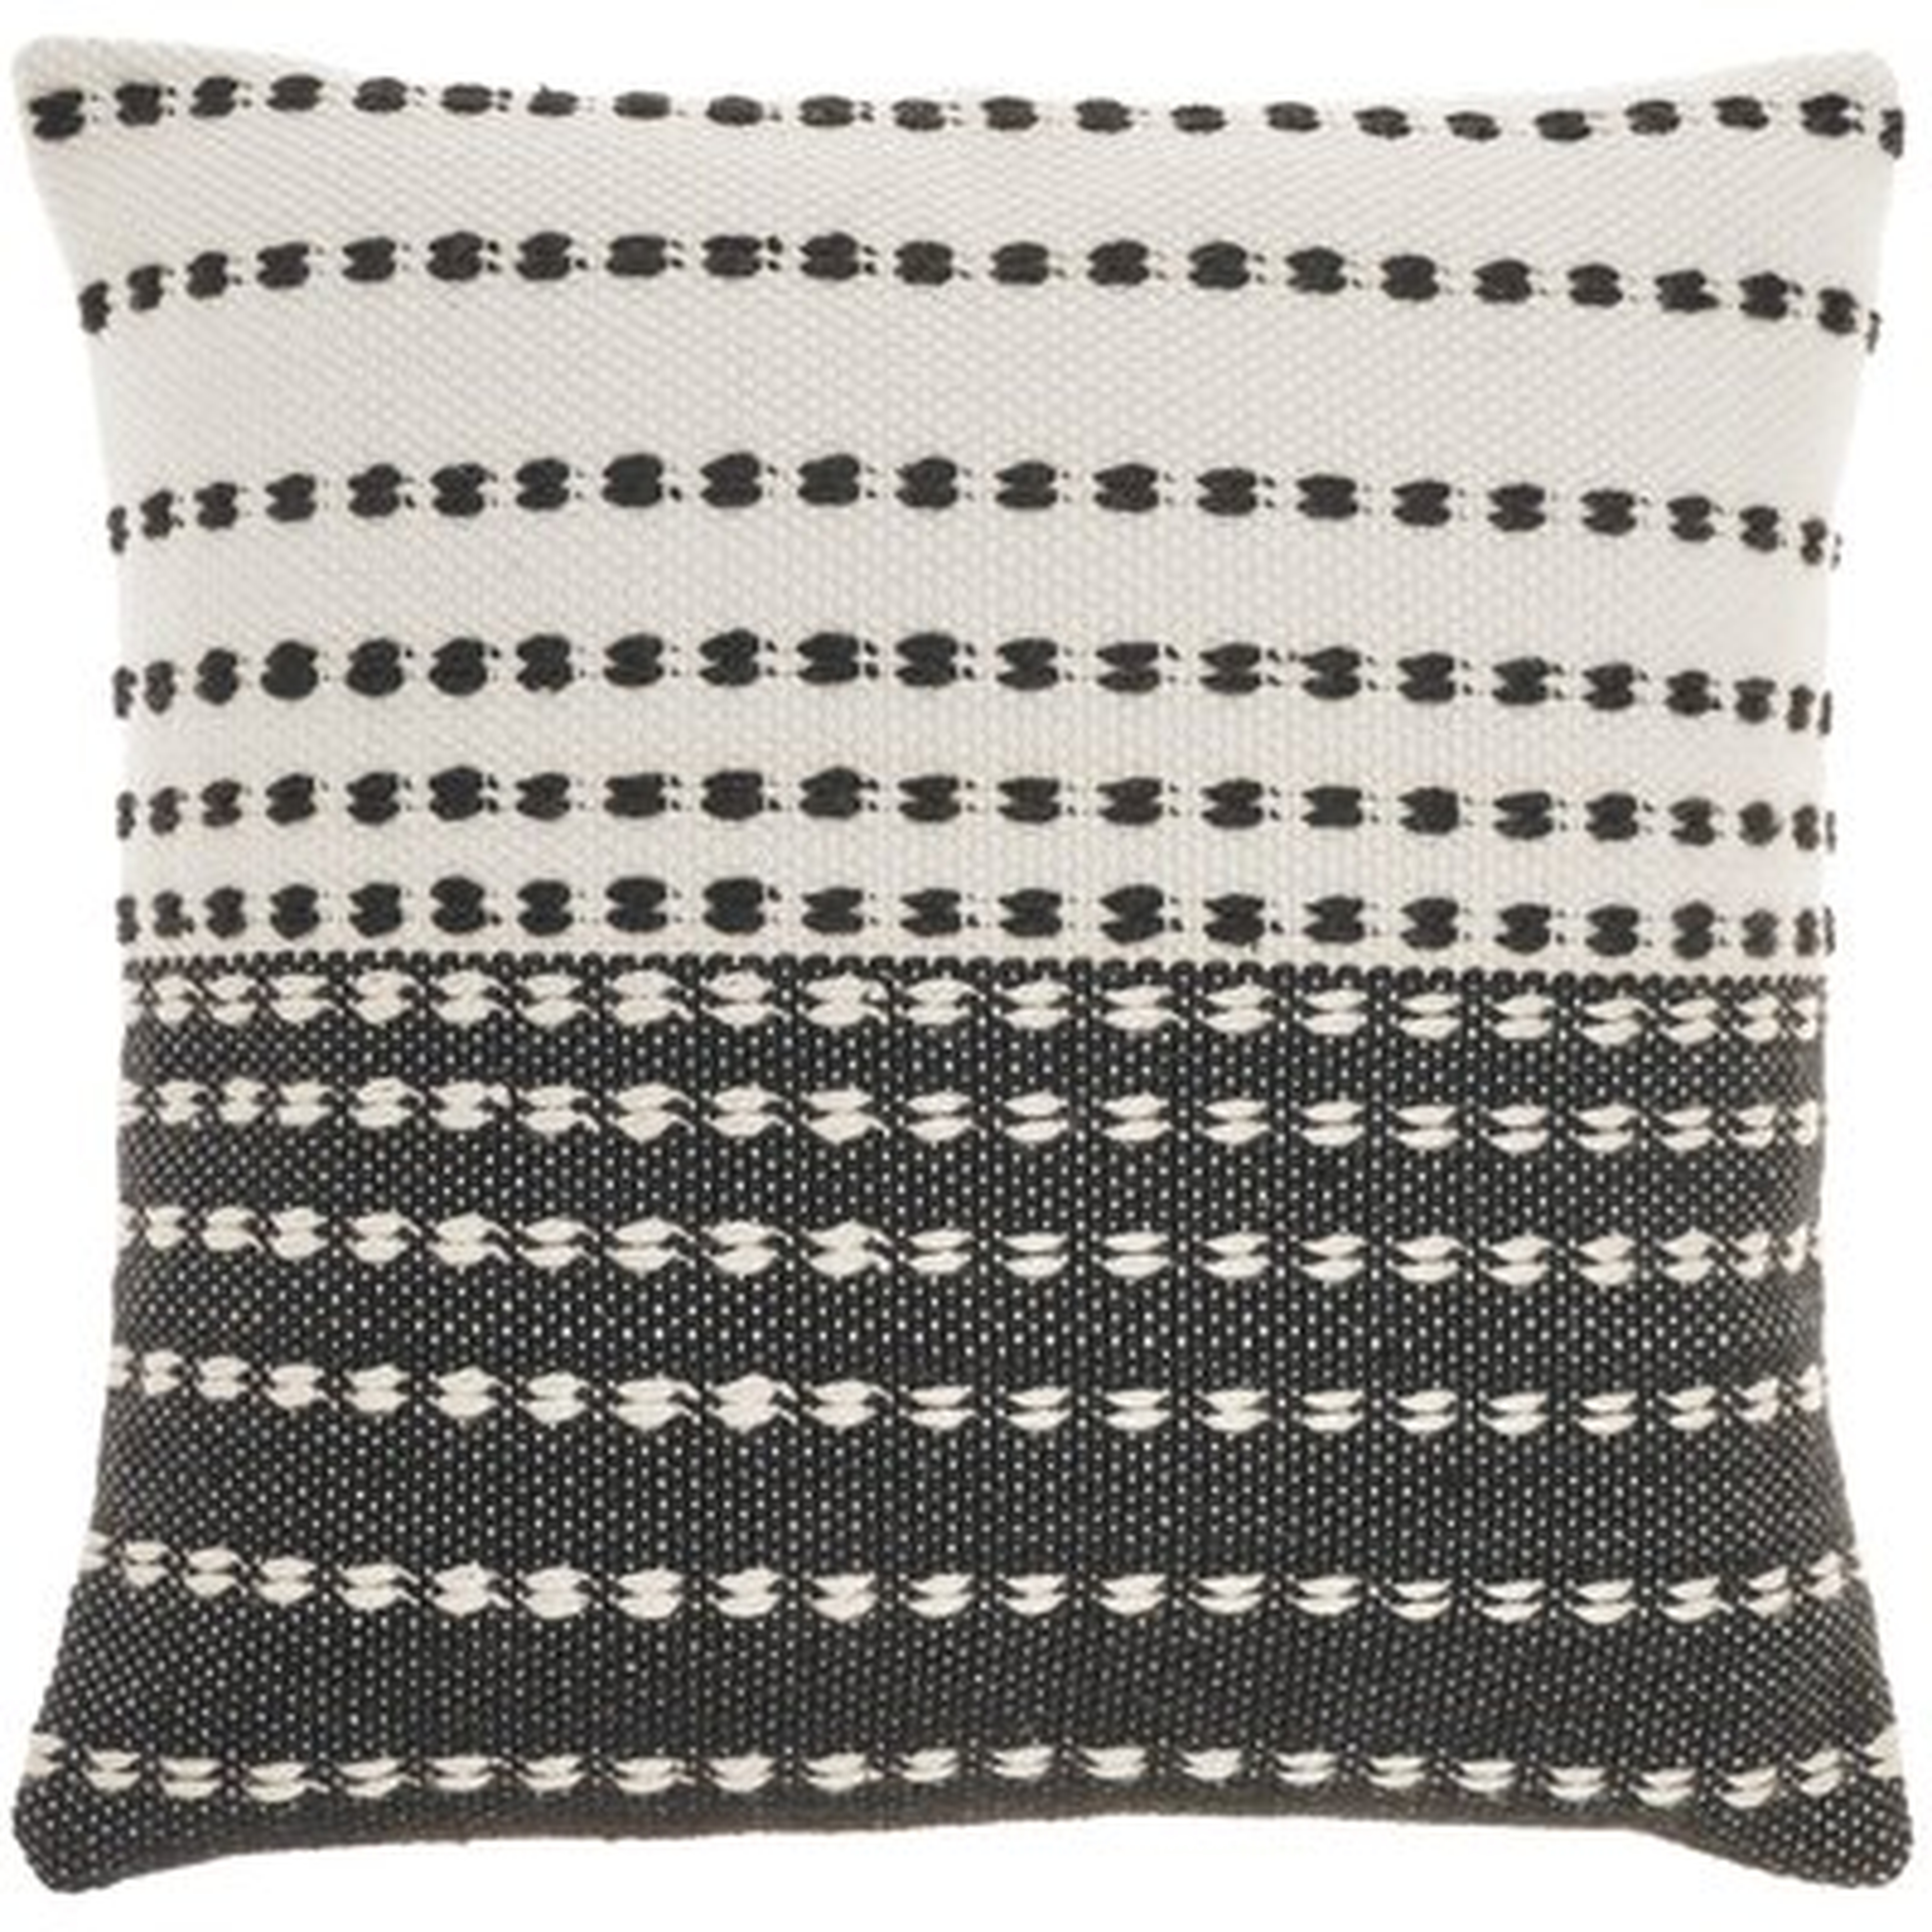 Corisco Pillows Indoor/Outdoor Woven And Stitched Throw Pillows - AllModern